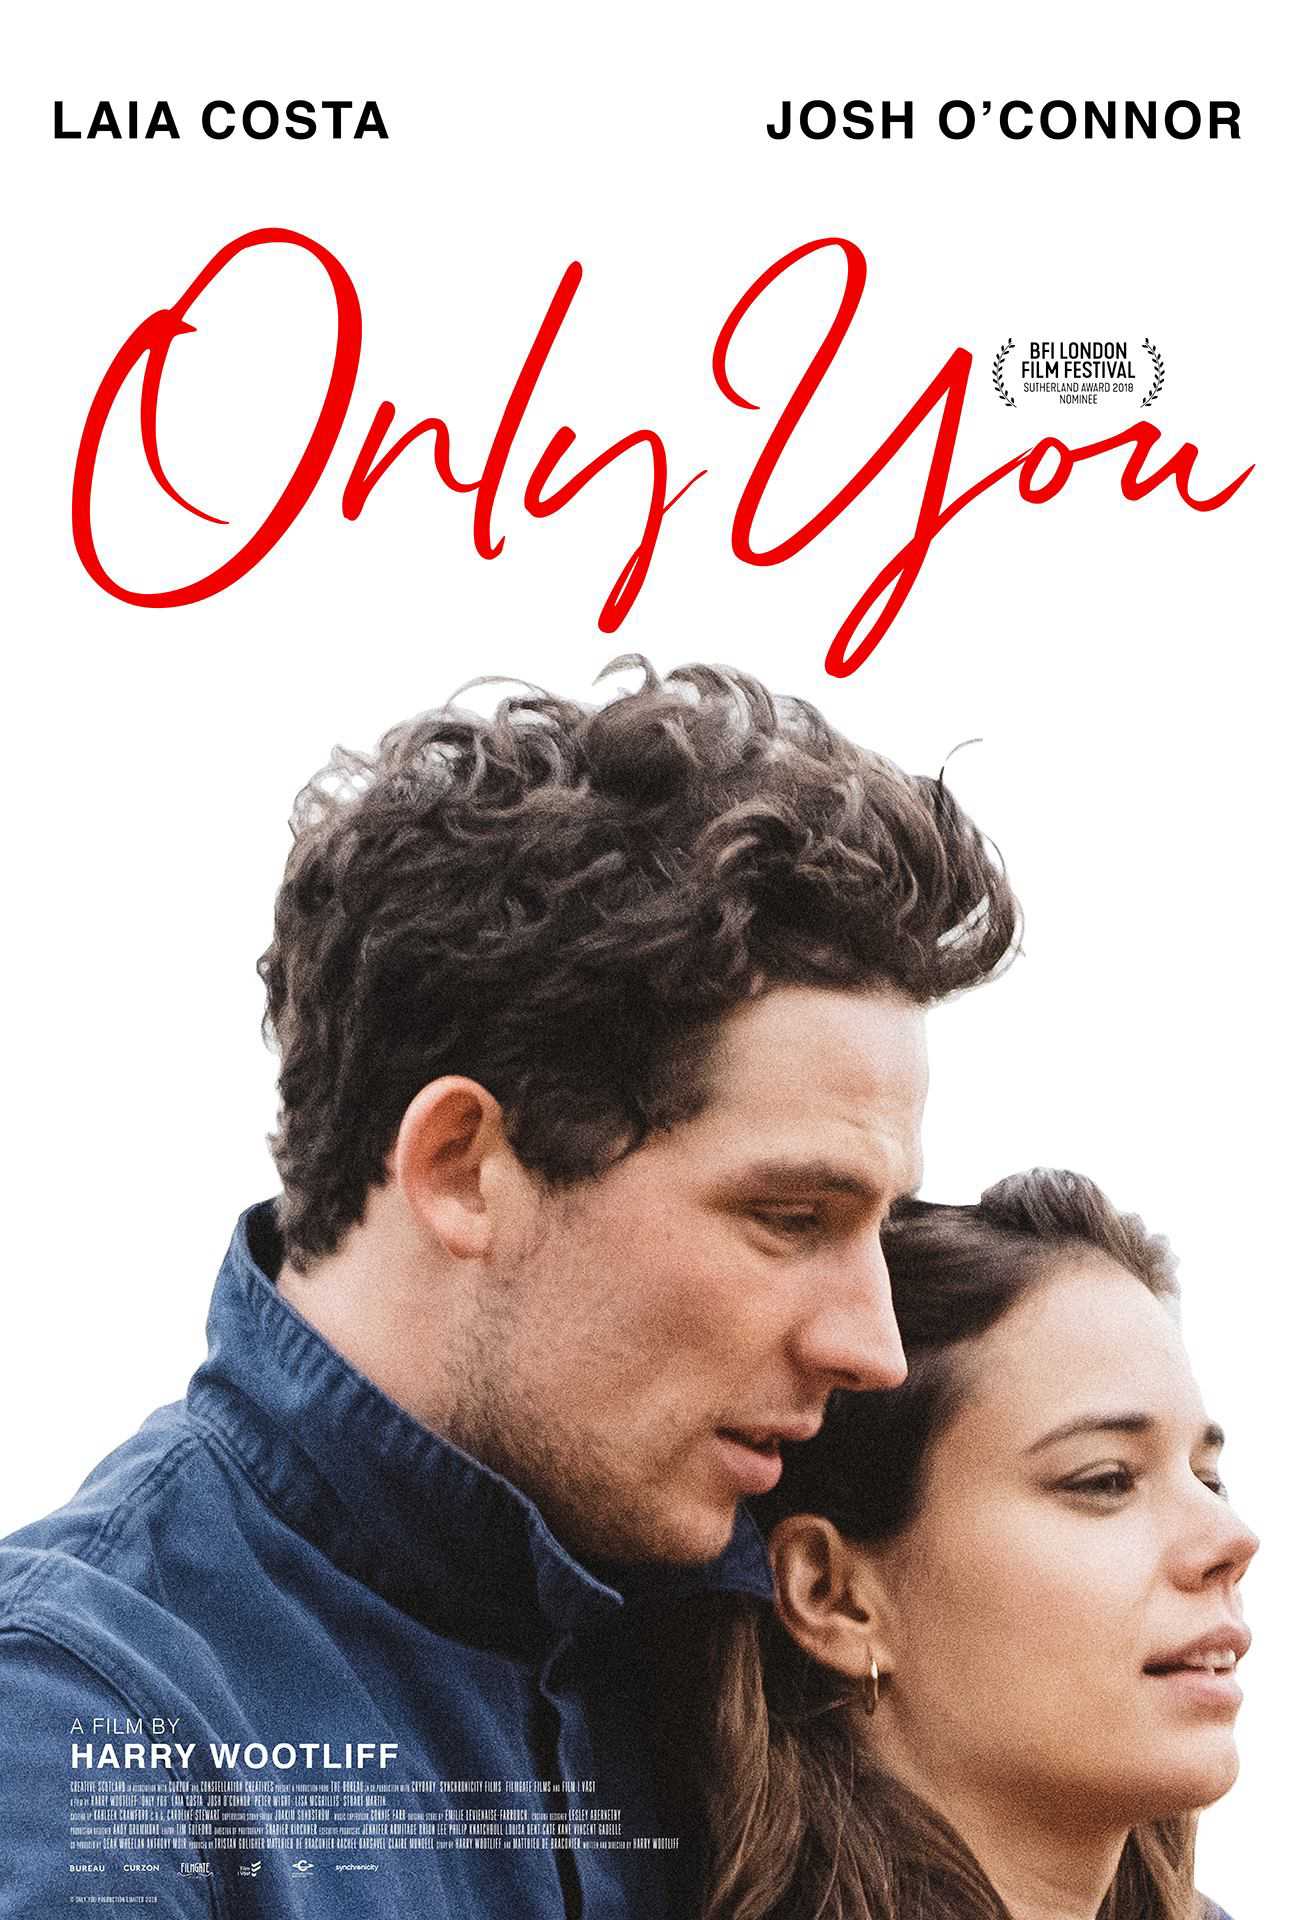 Only You - Only You